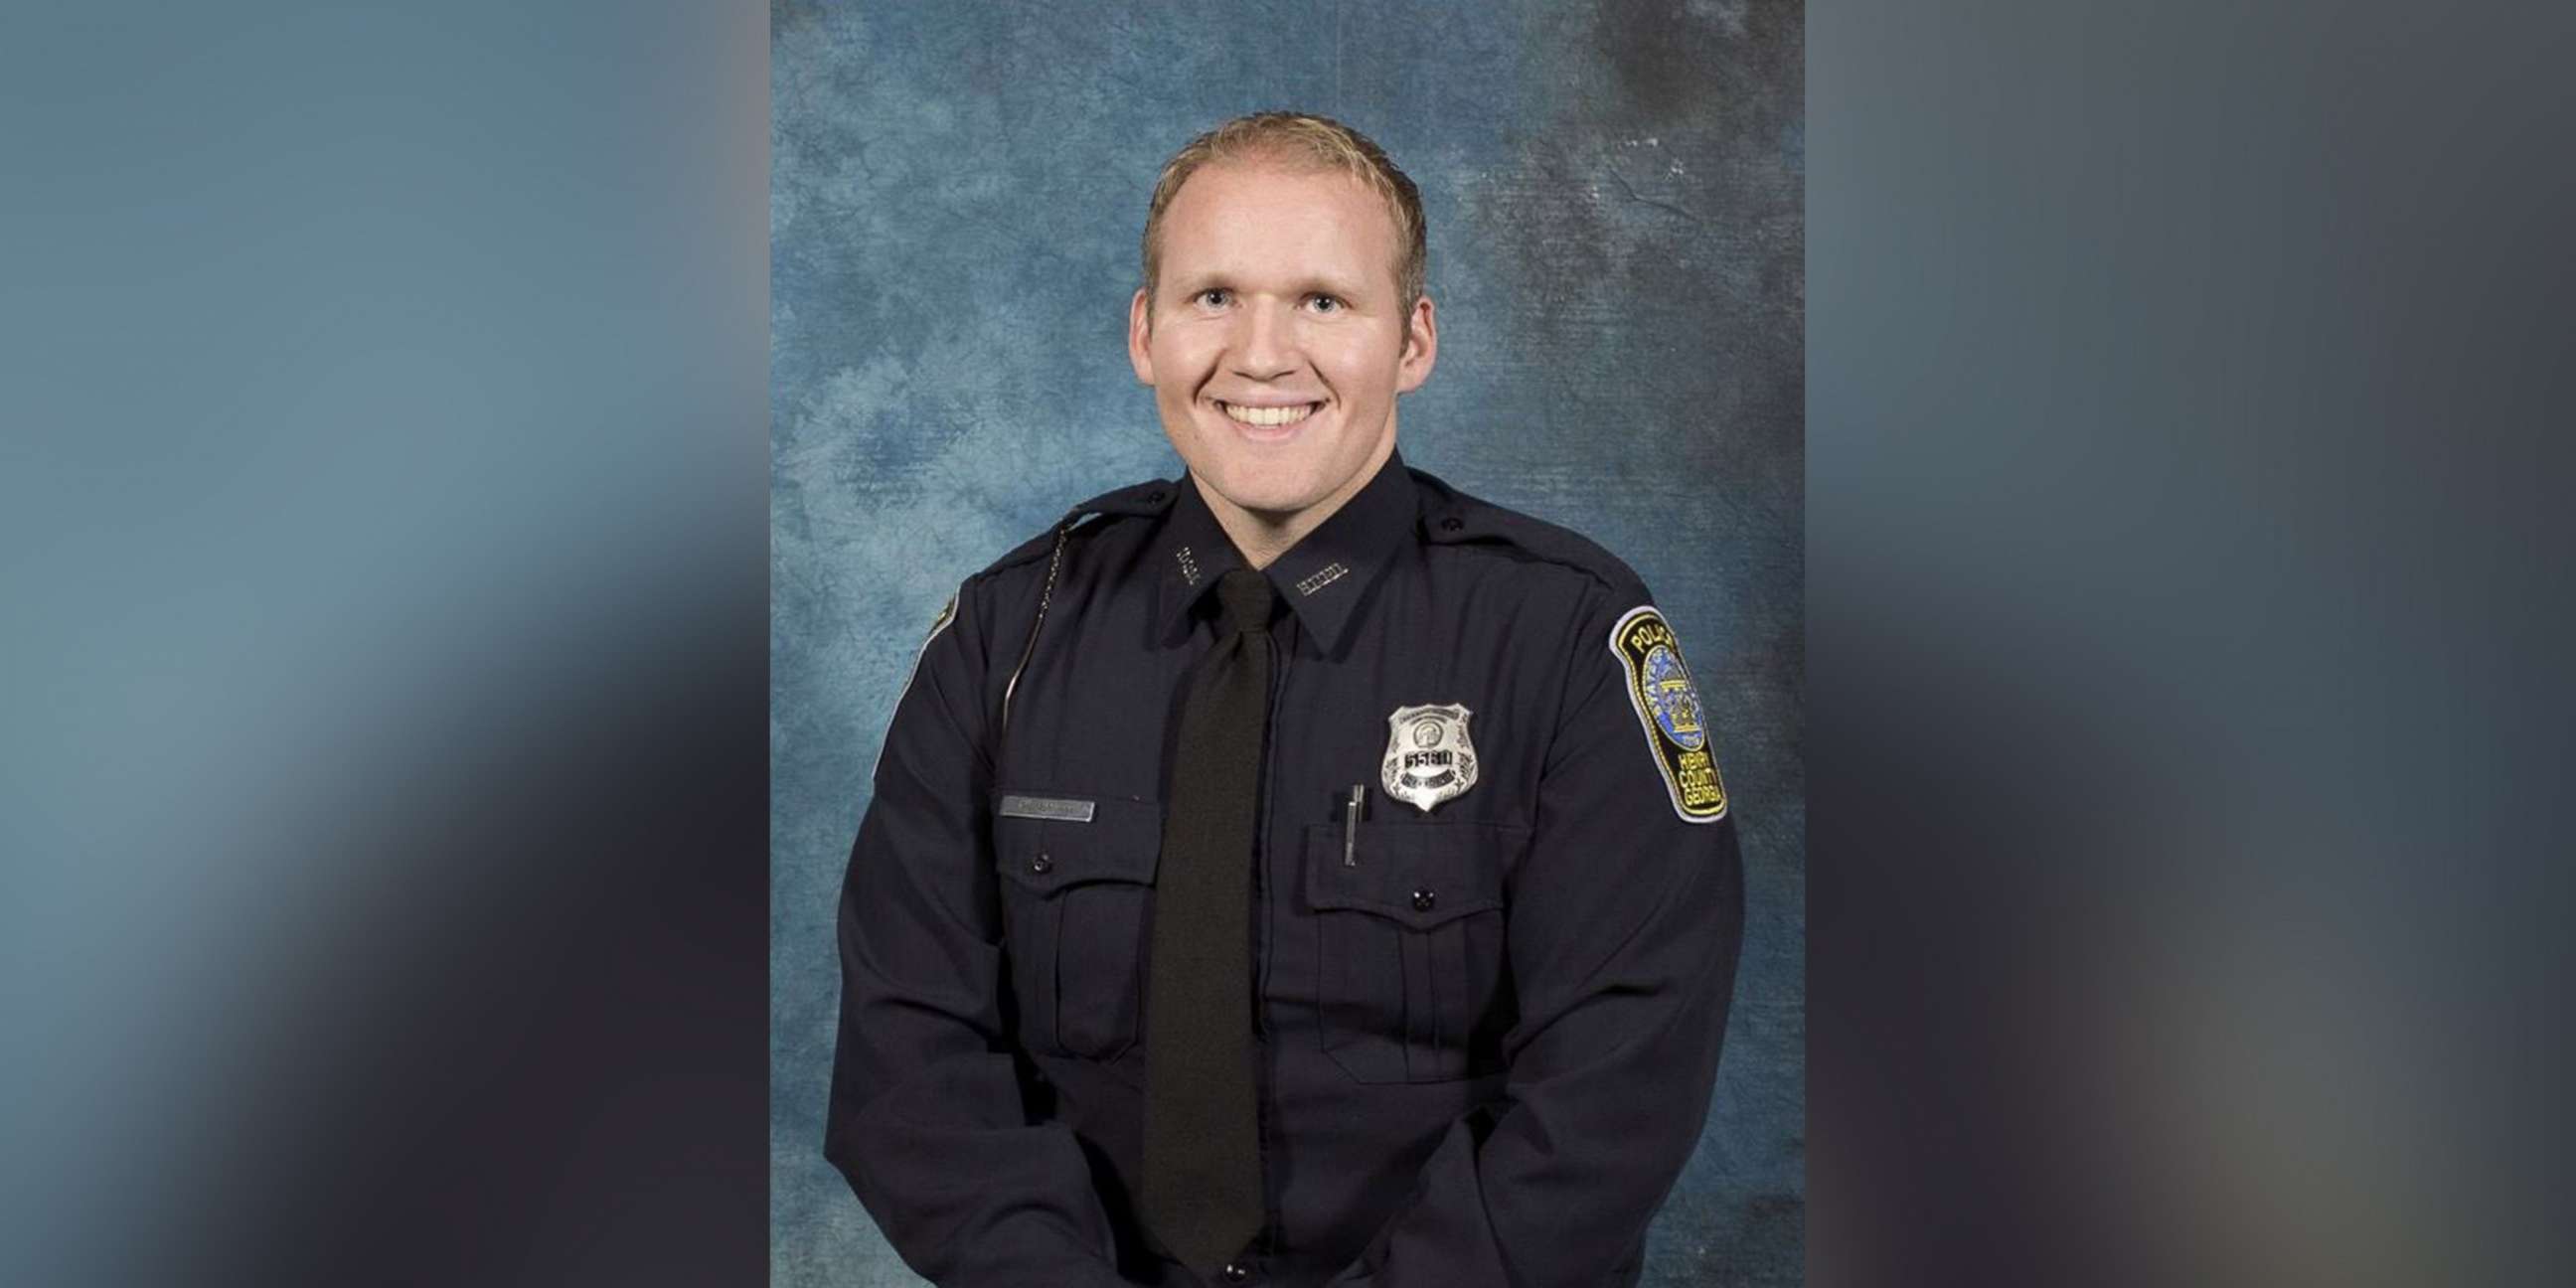 PHOTO: Police officer Michael Smith was shot while responding to a call, Dec. 6, 2018, in Georgia.